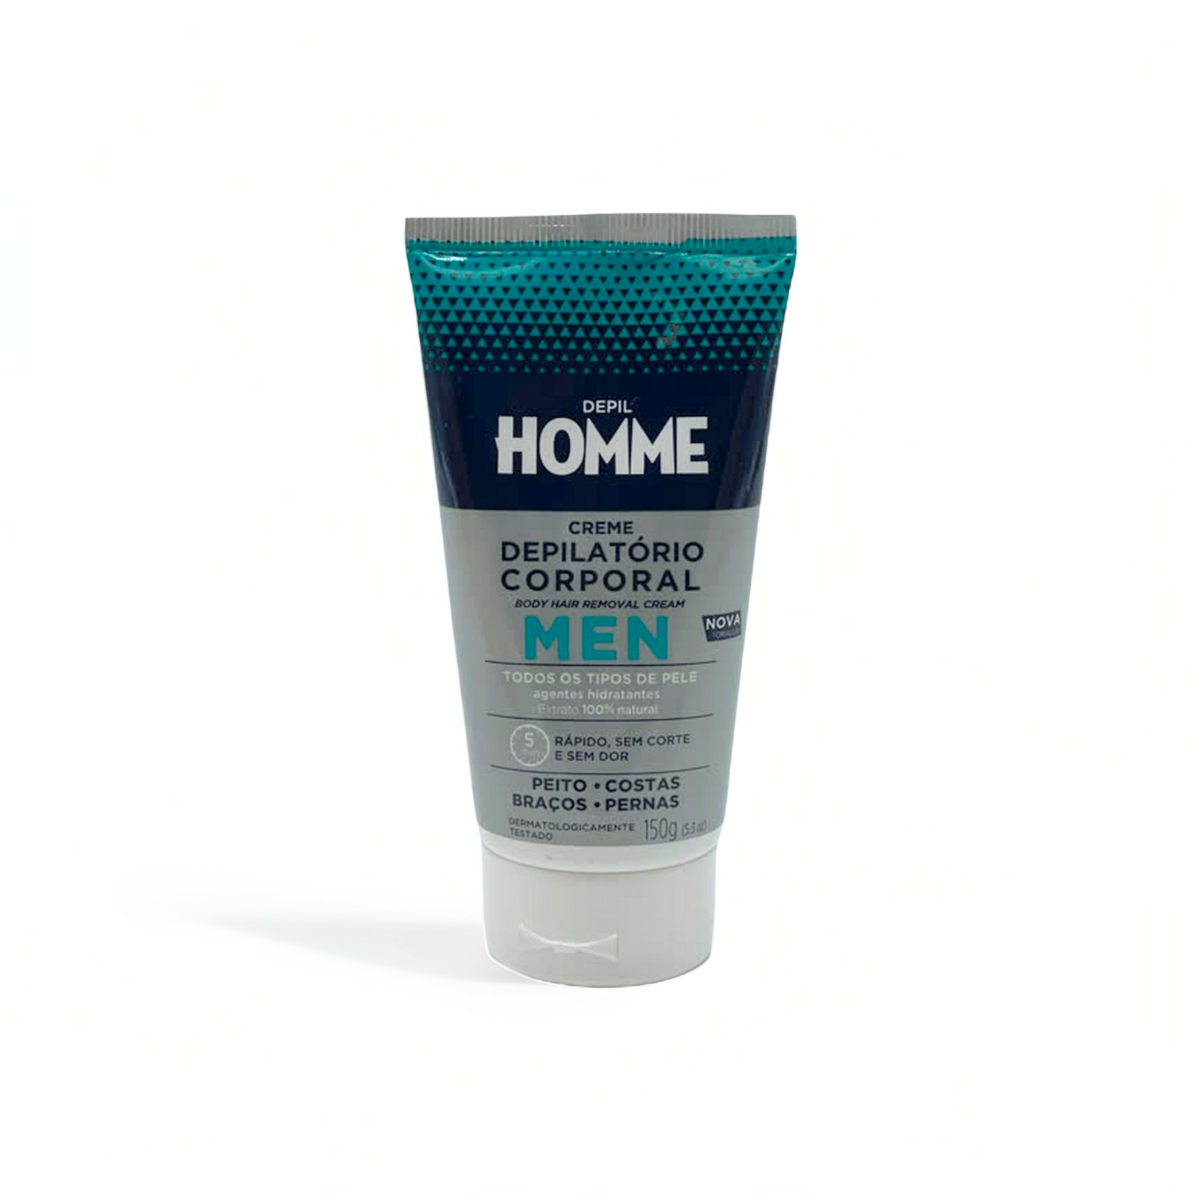 Depil HOMME Hair Removal Body Cream, Soothing Depilatory Cream 150g